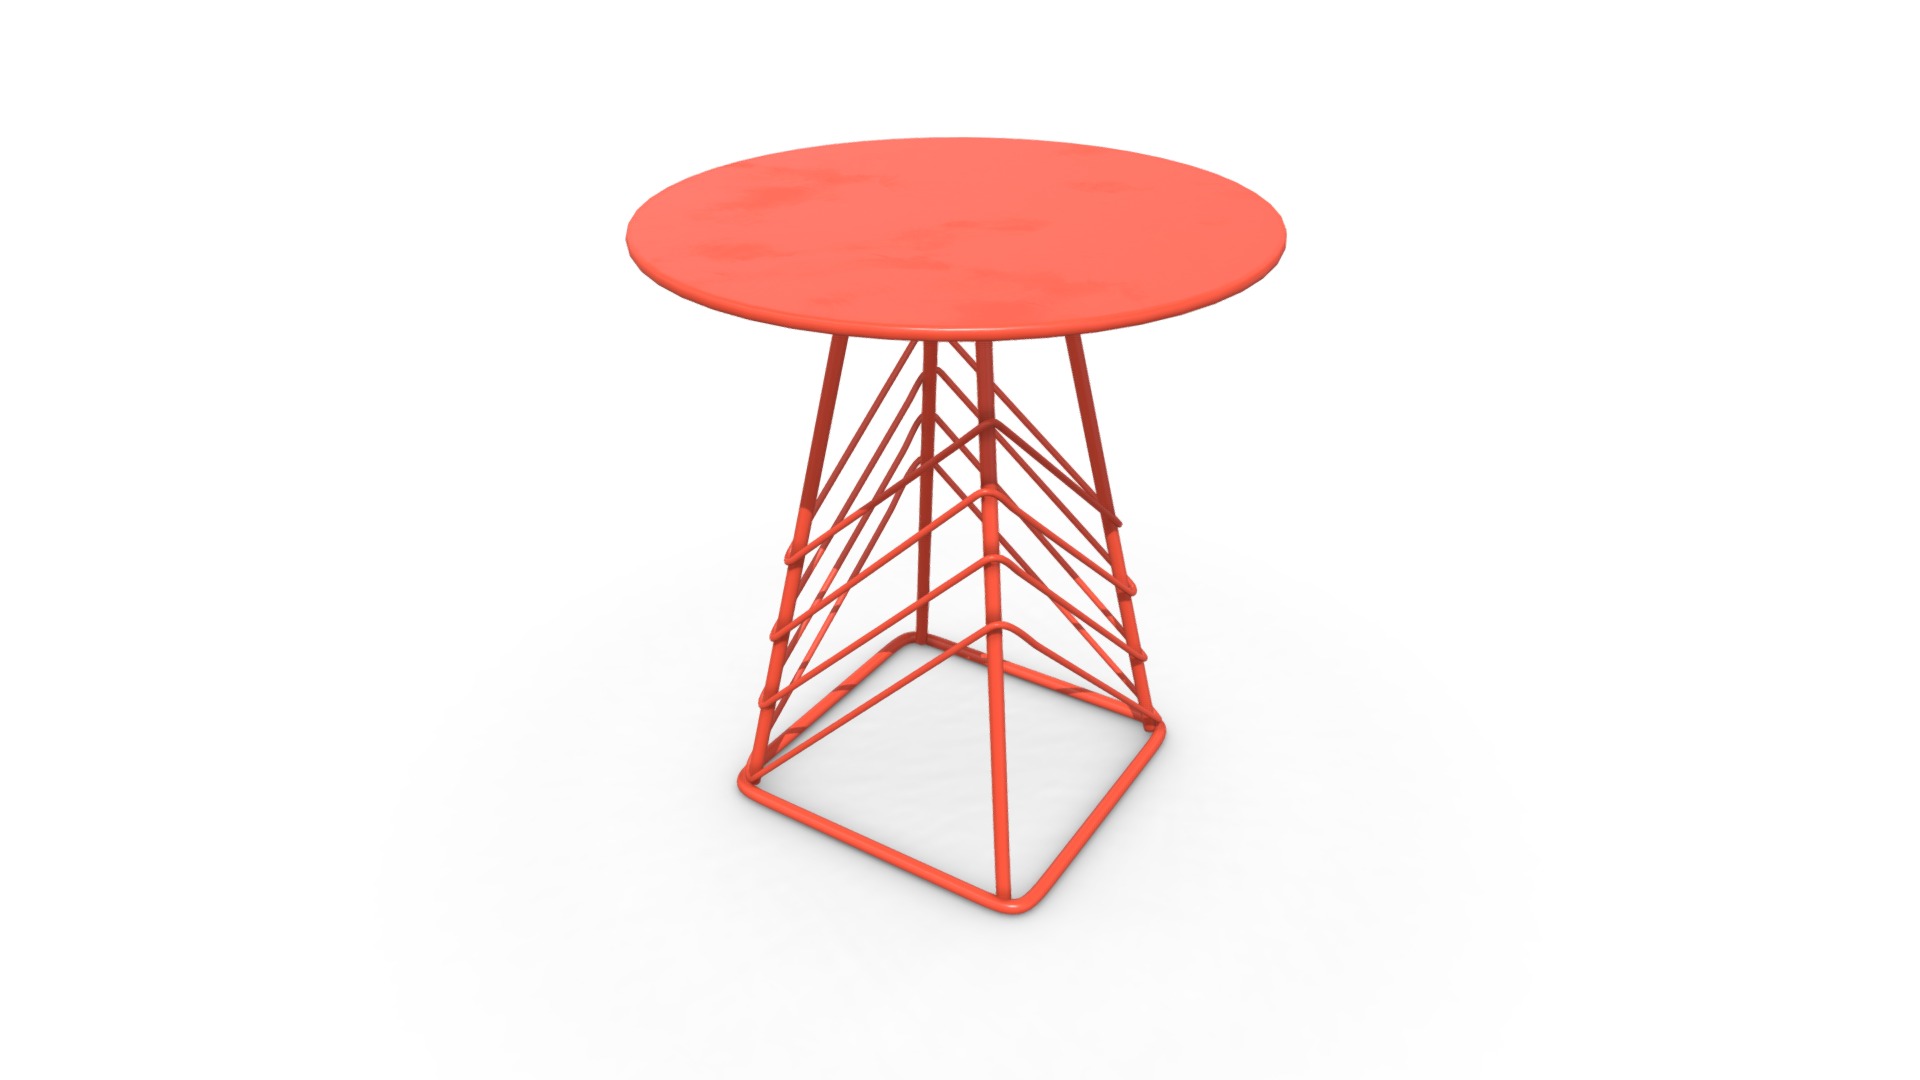 3D model Tega Garden Bistro Table, Red - This is a 3D model of the Tega Garden Bistro Table, Red. The 3D model is about a red and white chair.